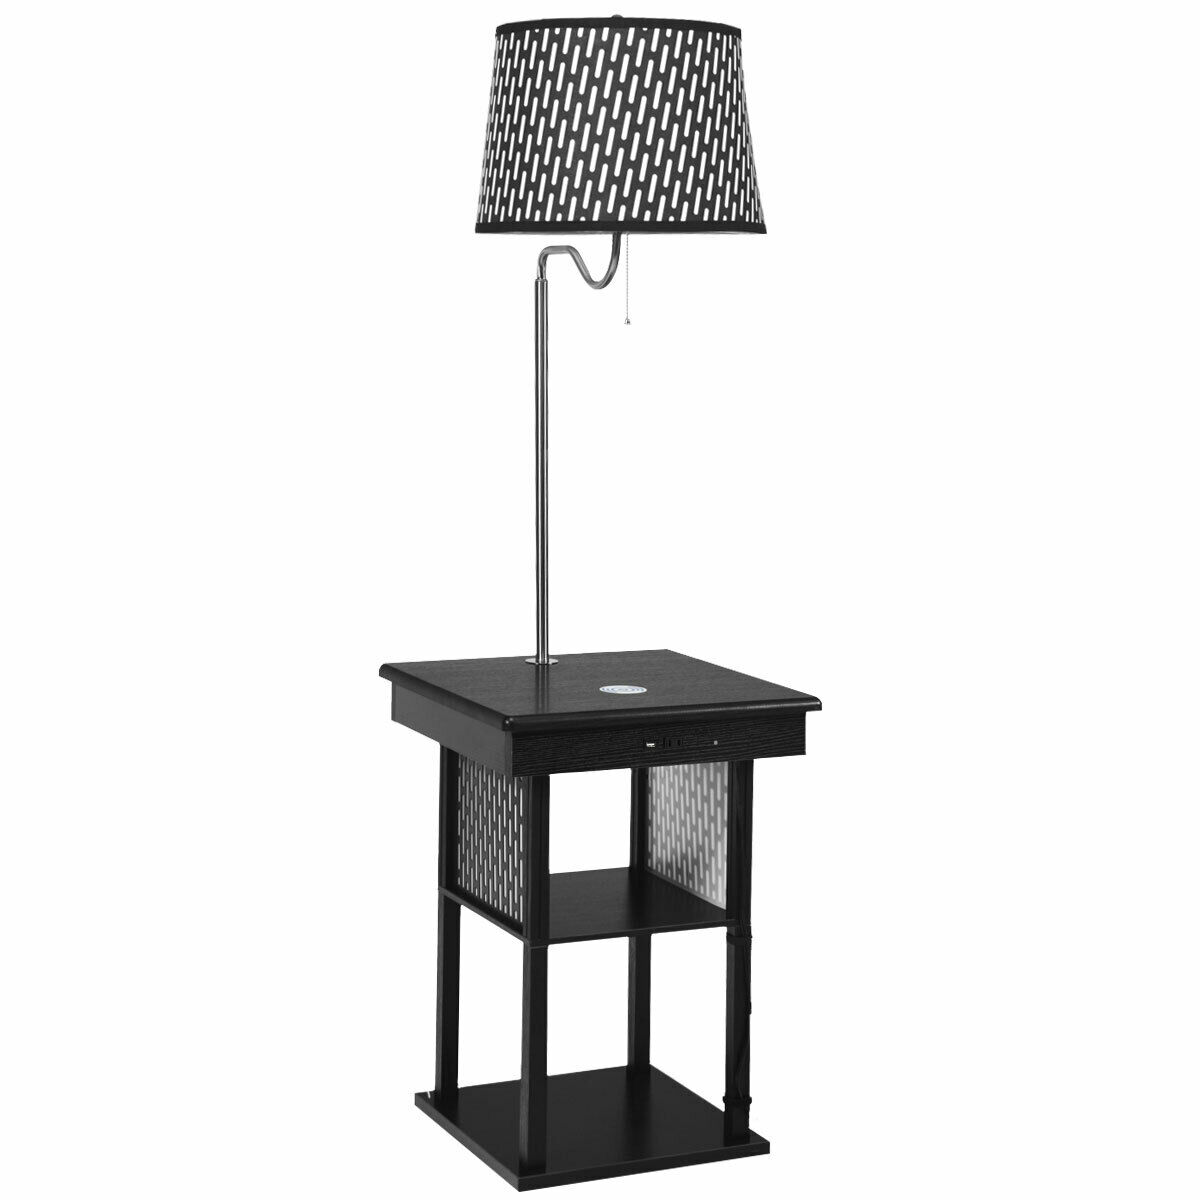 Costway Floor Lamp End Table Modern, Hometrends End Table Floor Lamp With Usb Port